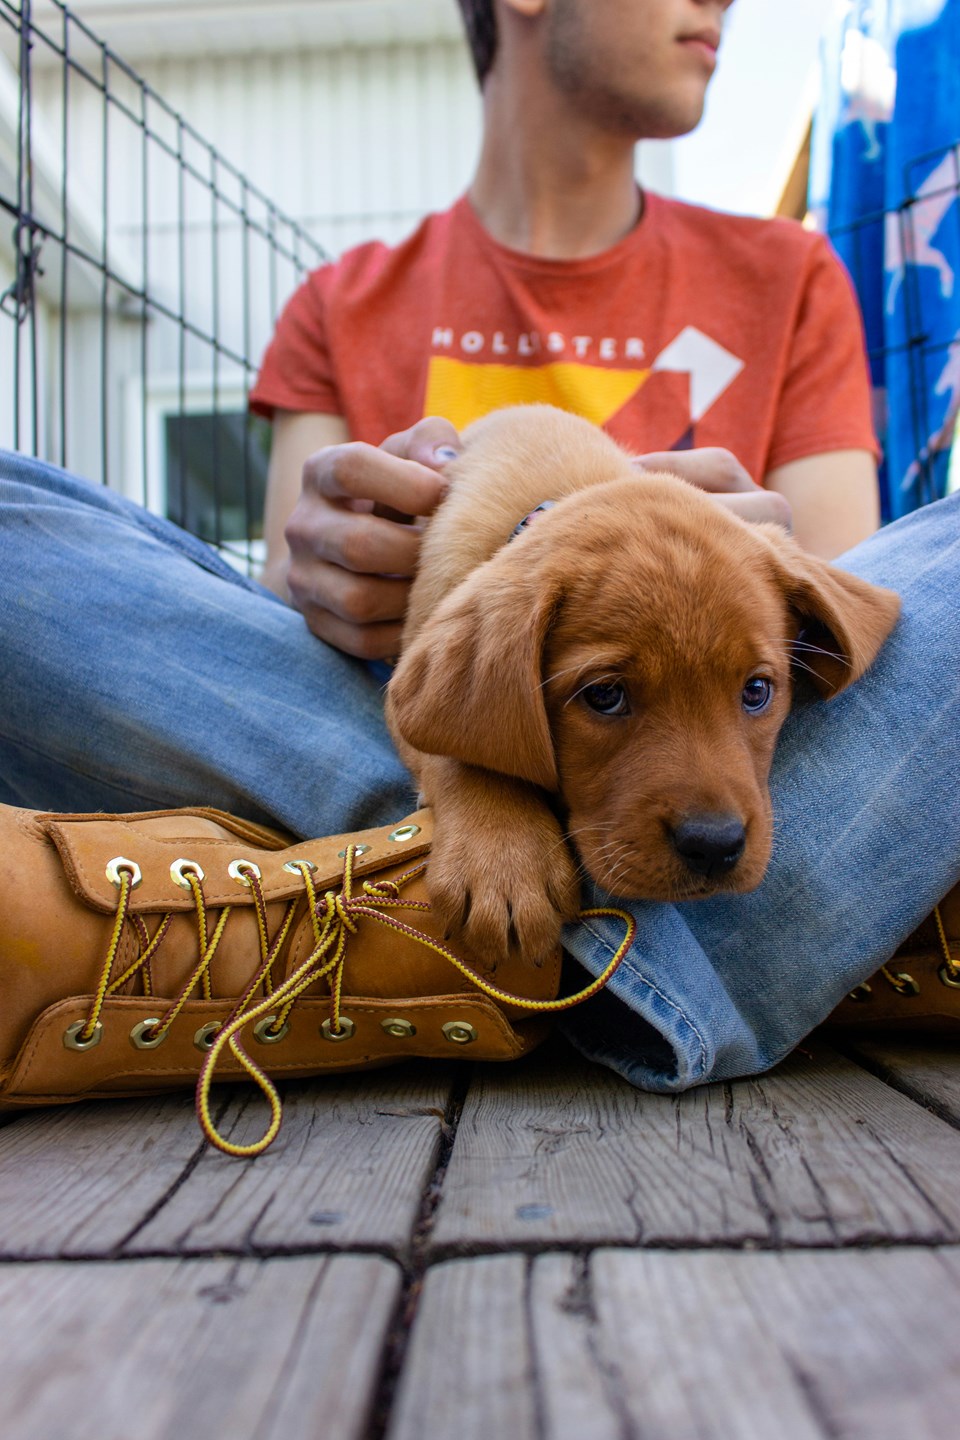 Soulful Brown Puppy Sitting In The Lap Of A Man Wearing Blue Jeans & Red T-Shirt